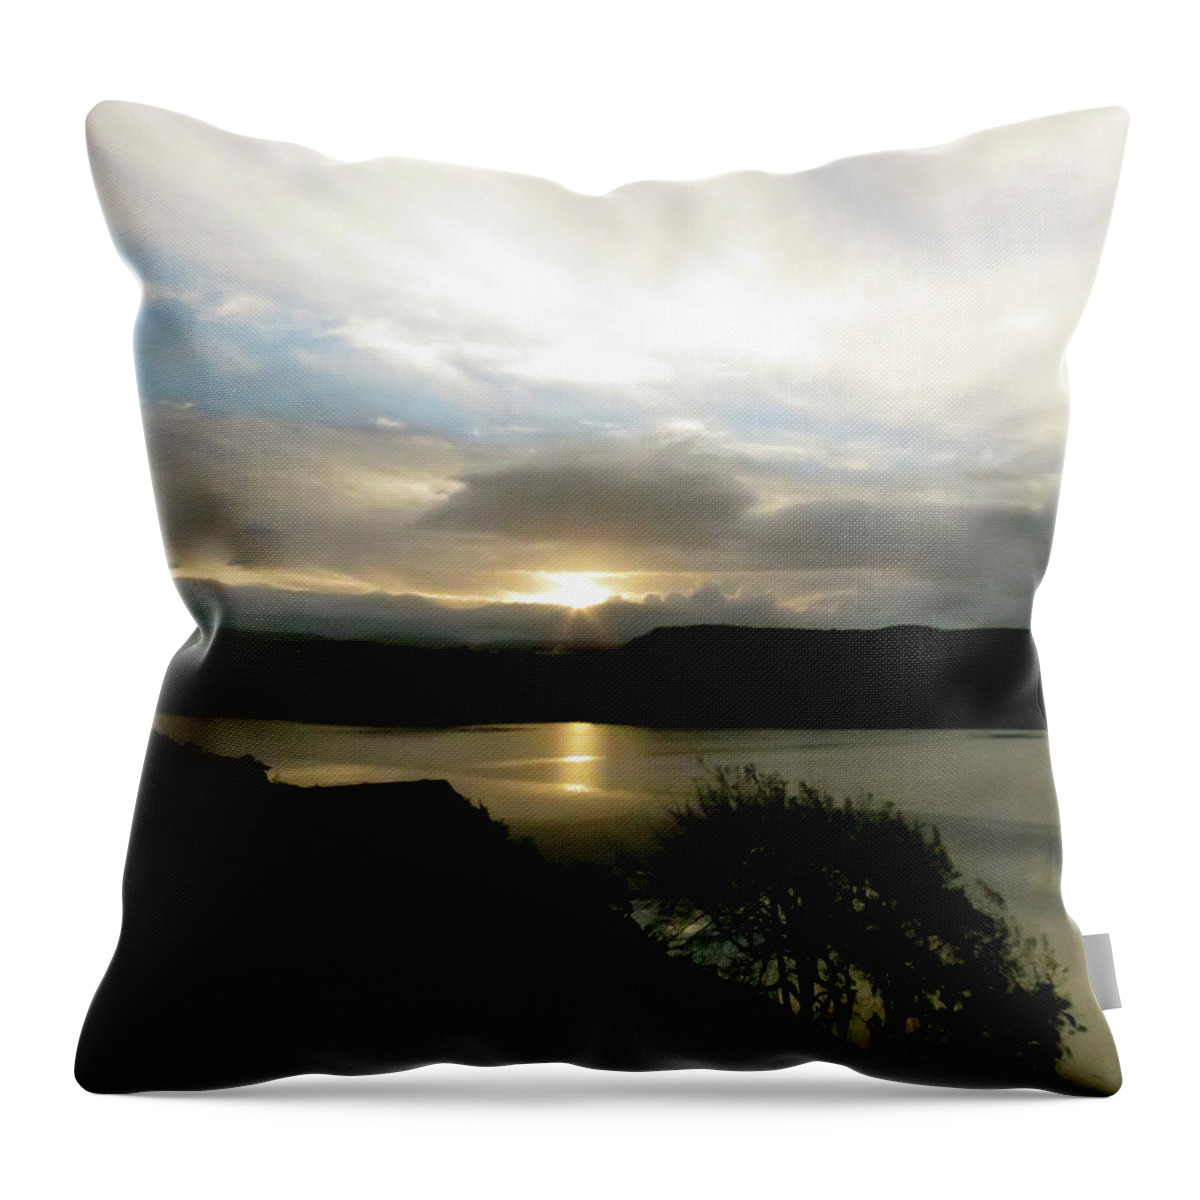 Morning Sky Throw Pillow featuring the photograph Sun Rise by Azthet Photography